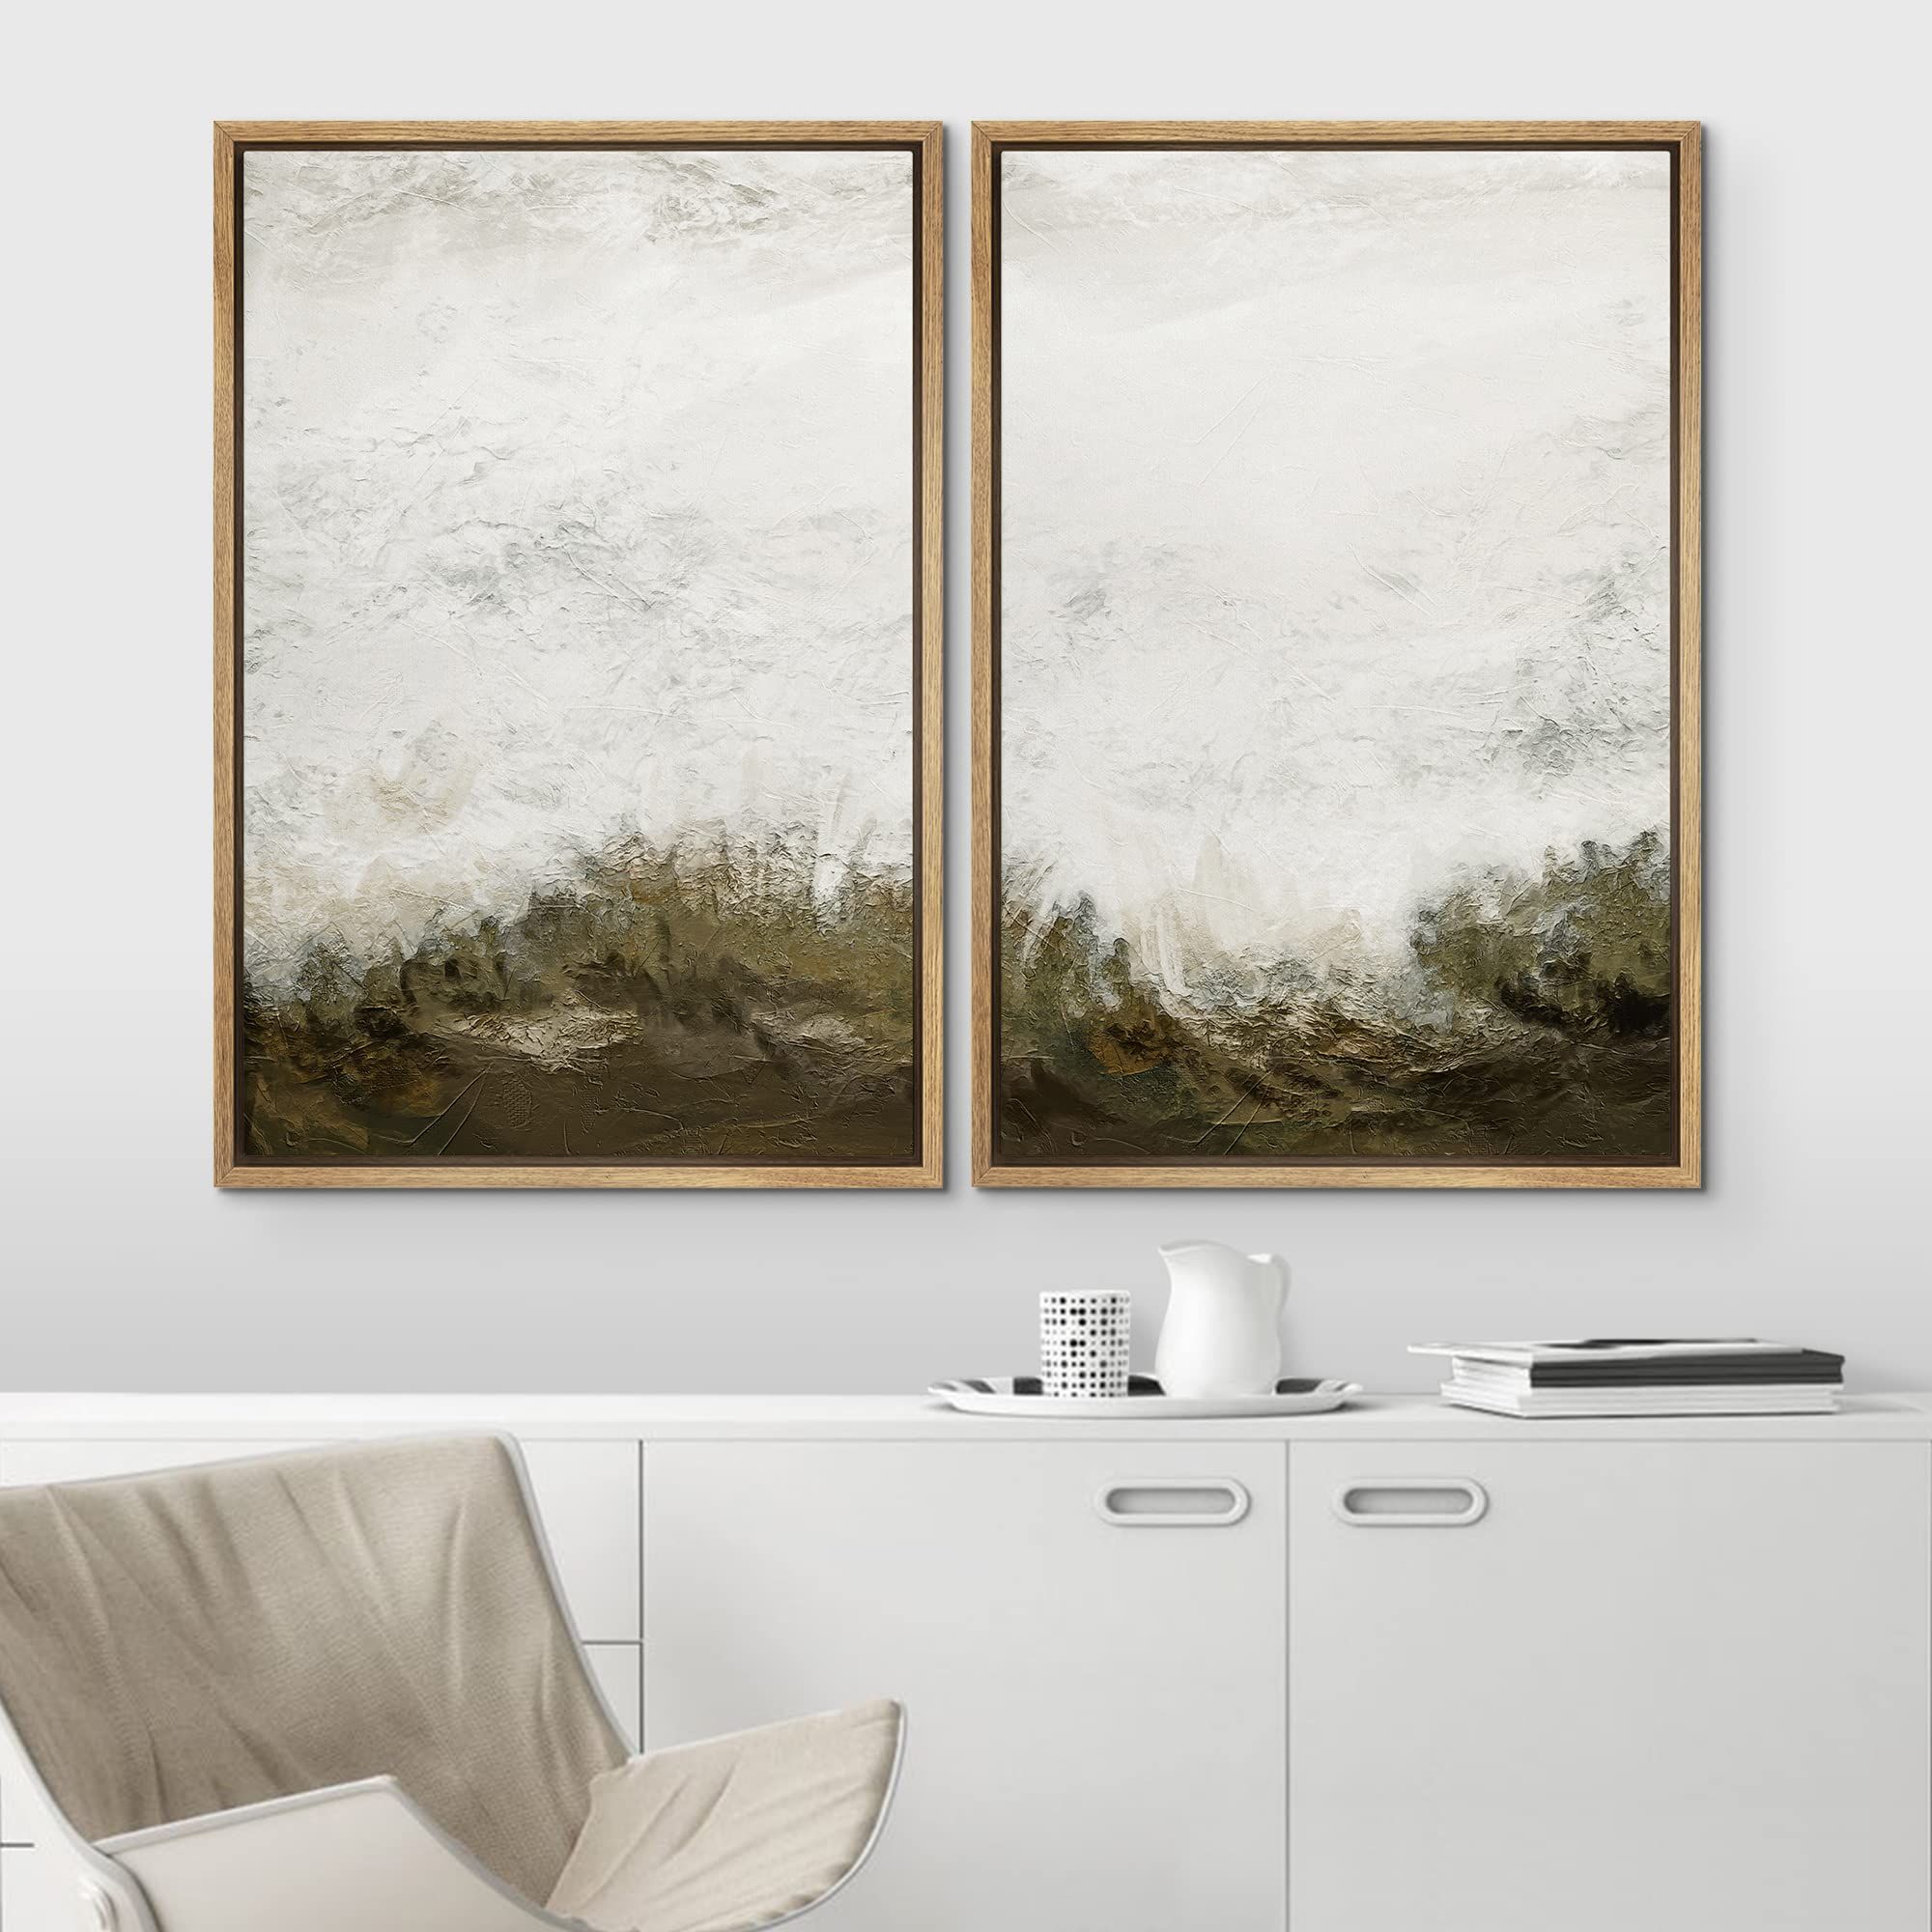 IDEA4WALL Framed Canvas Print Wall Art Set Grunge White Brown Color Field Landscape Abstract Shapes  | Amazon (US)